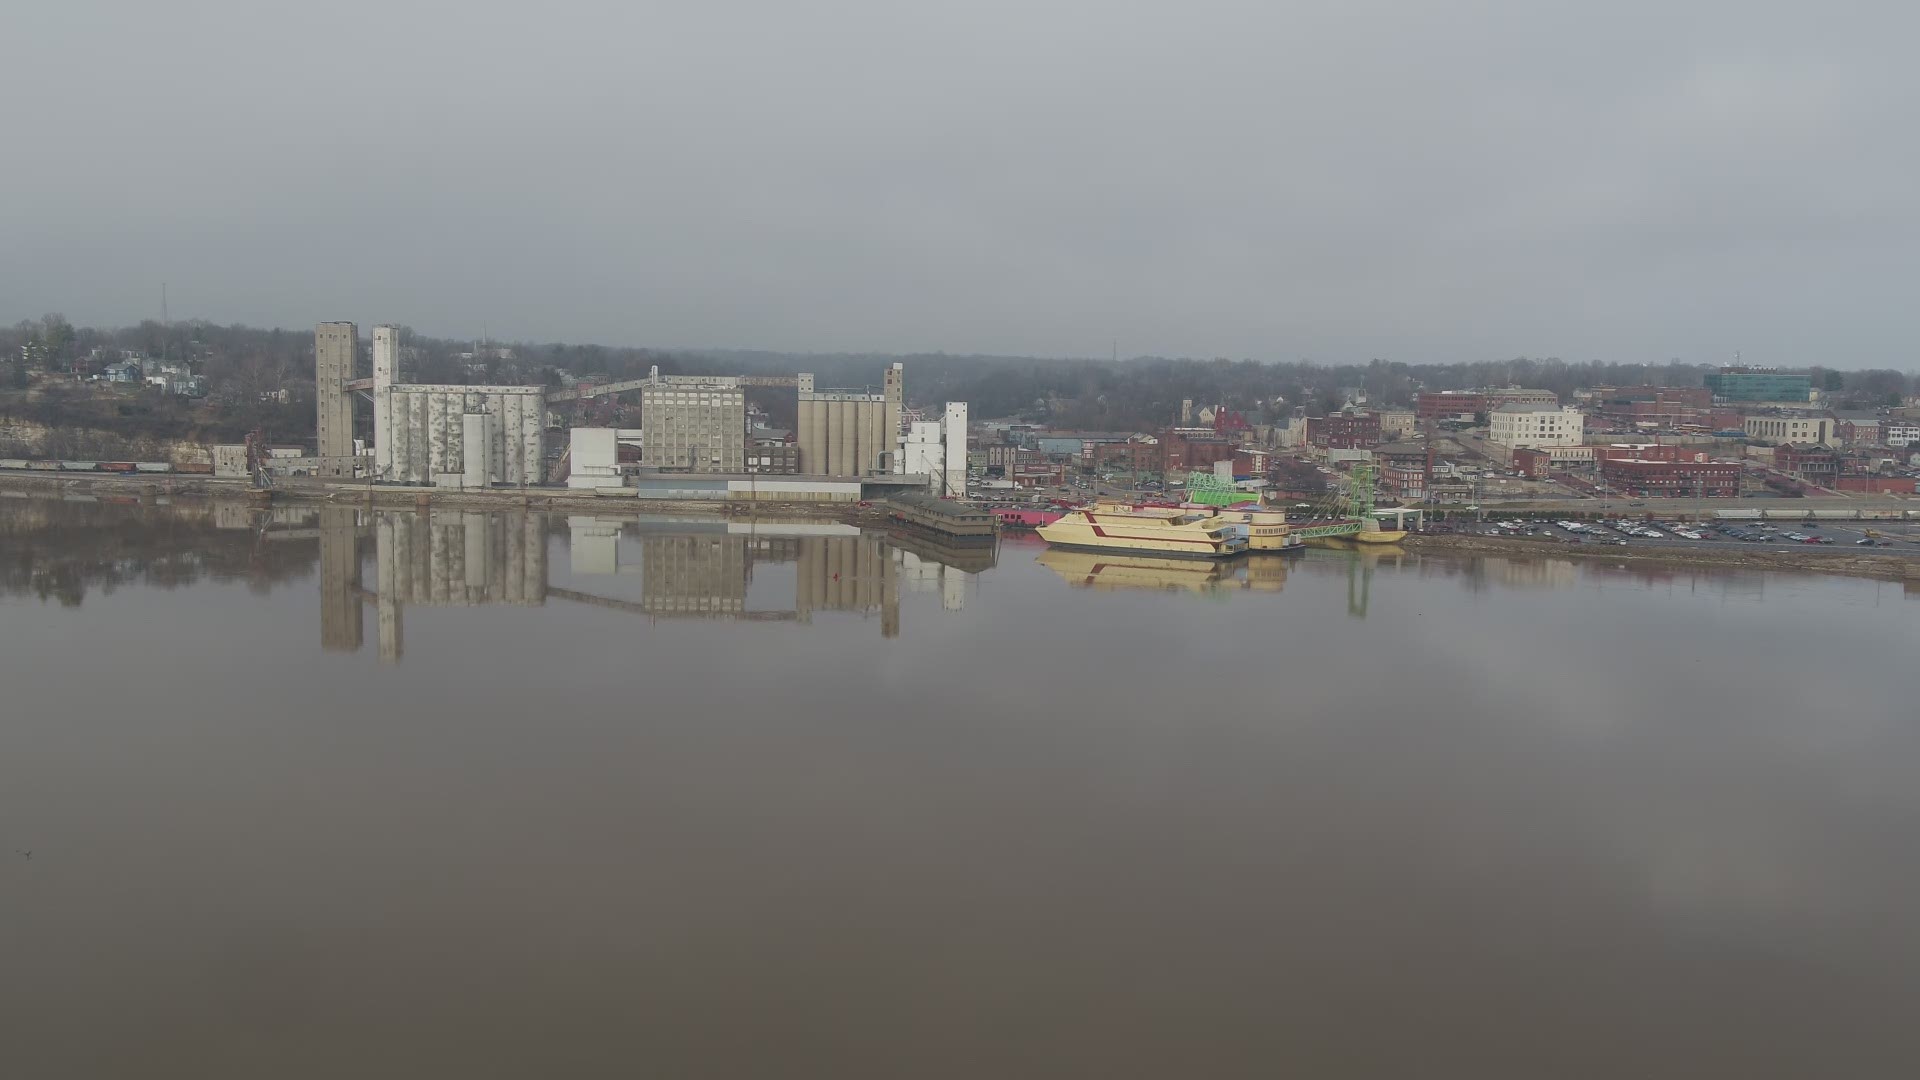 Check out the view of the river city from the 5 On Your Side drone